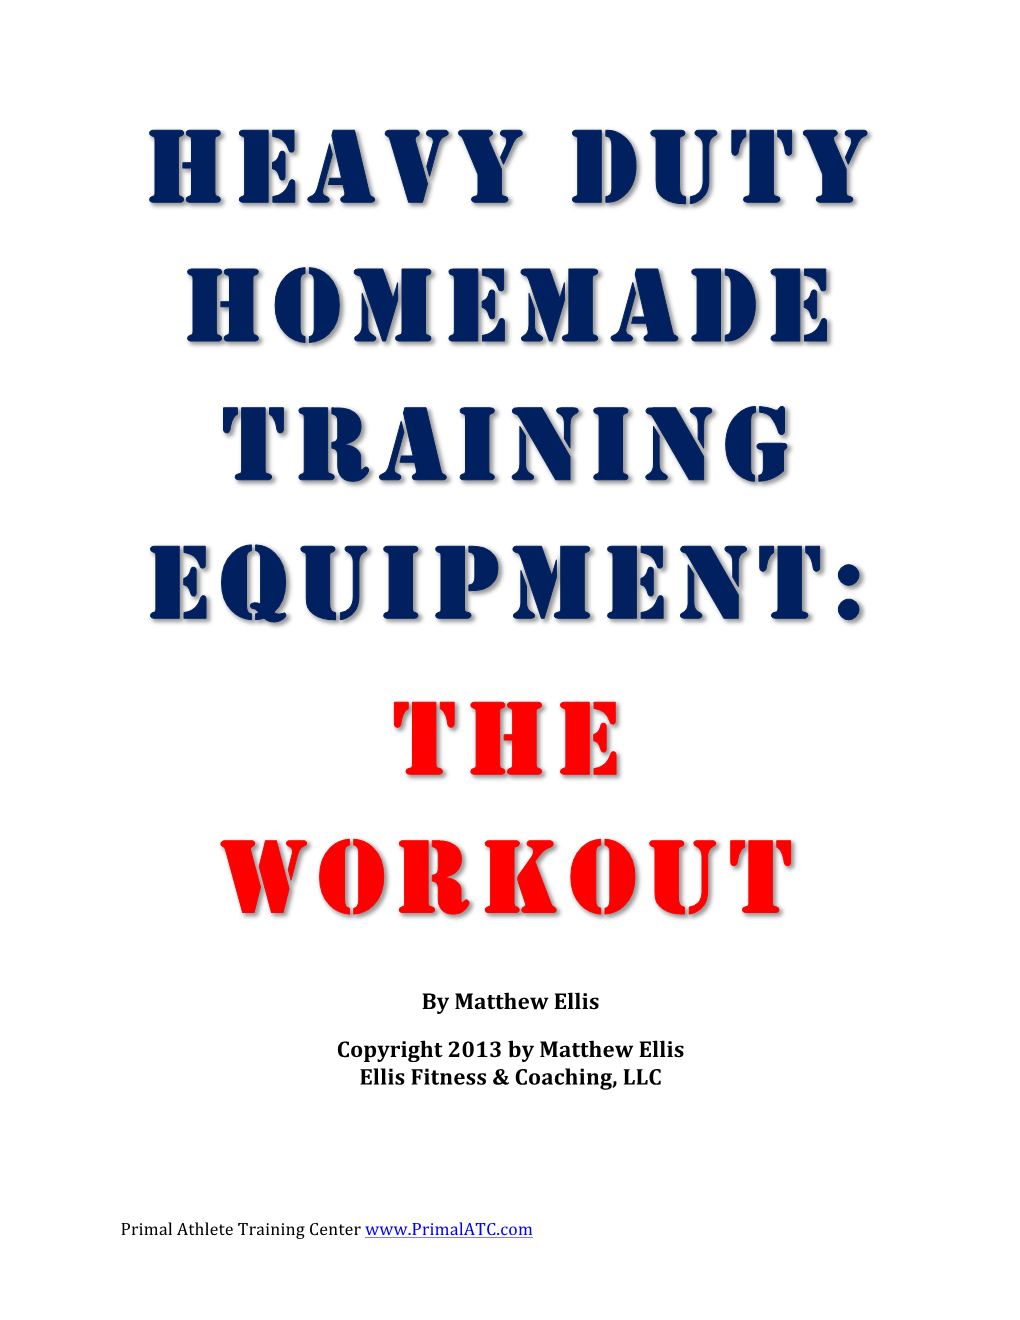 Homemade Equipment Workouts Page 13